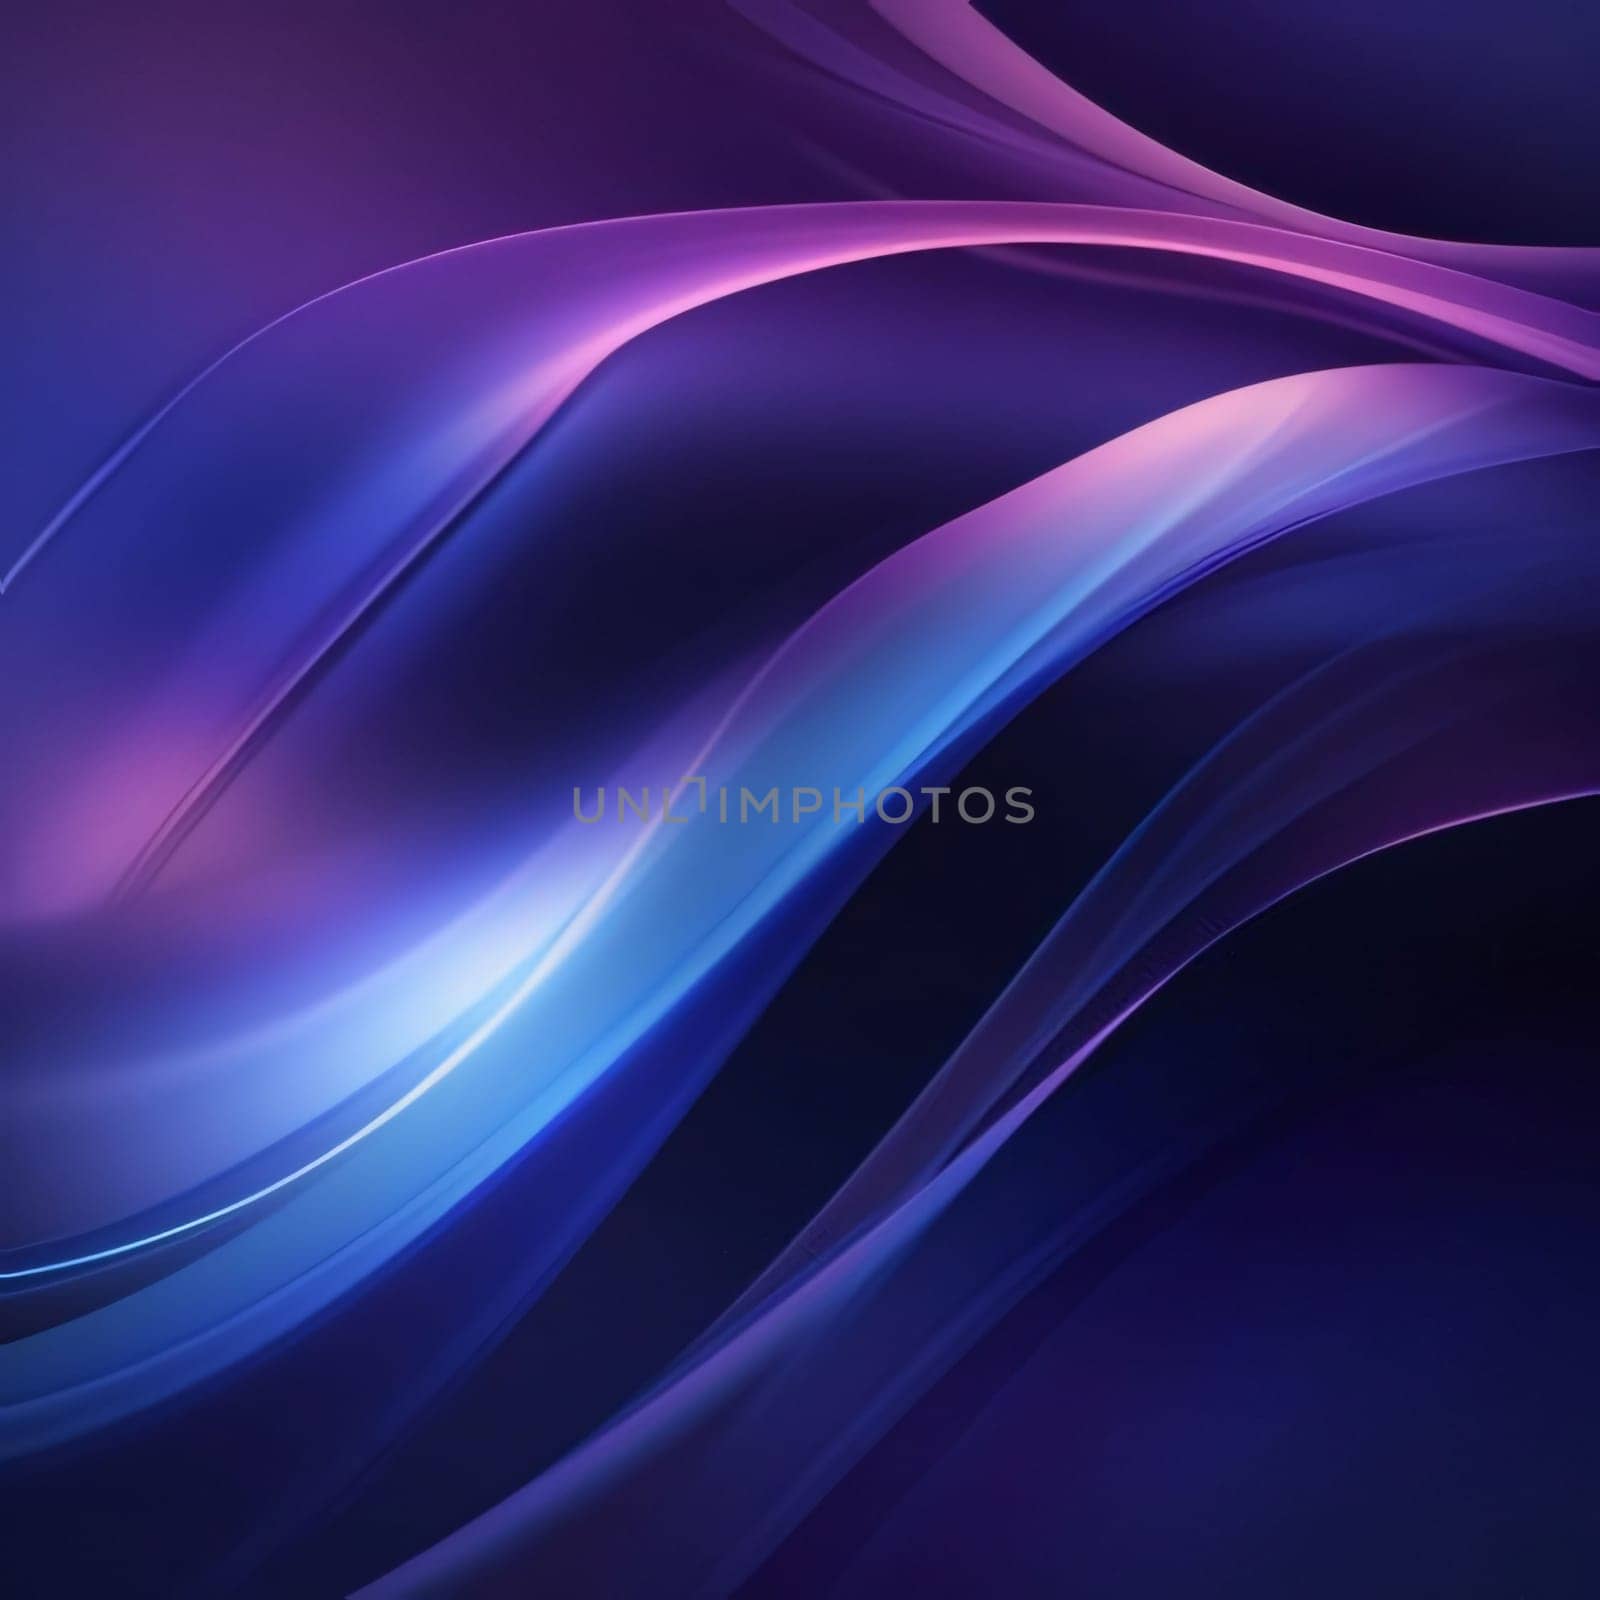 Abstract background design: Elegant abstract background with smooth lines in purple and blue colors